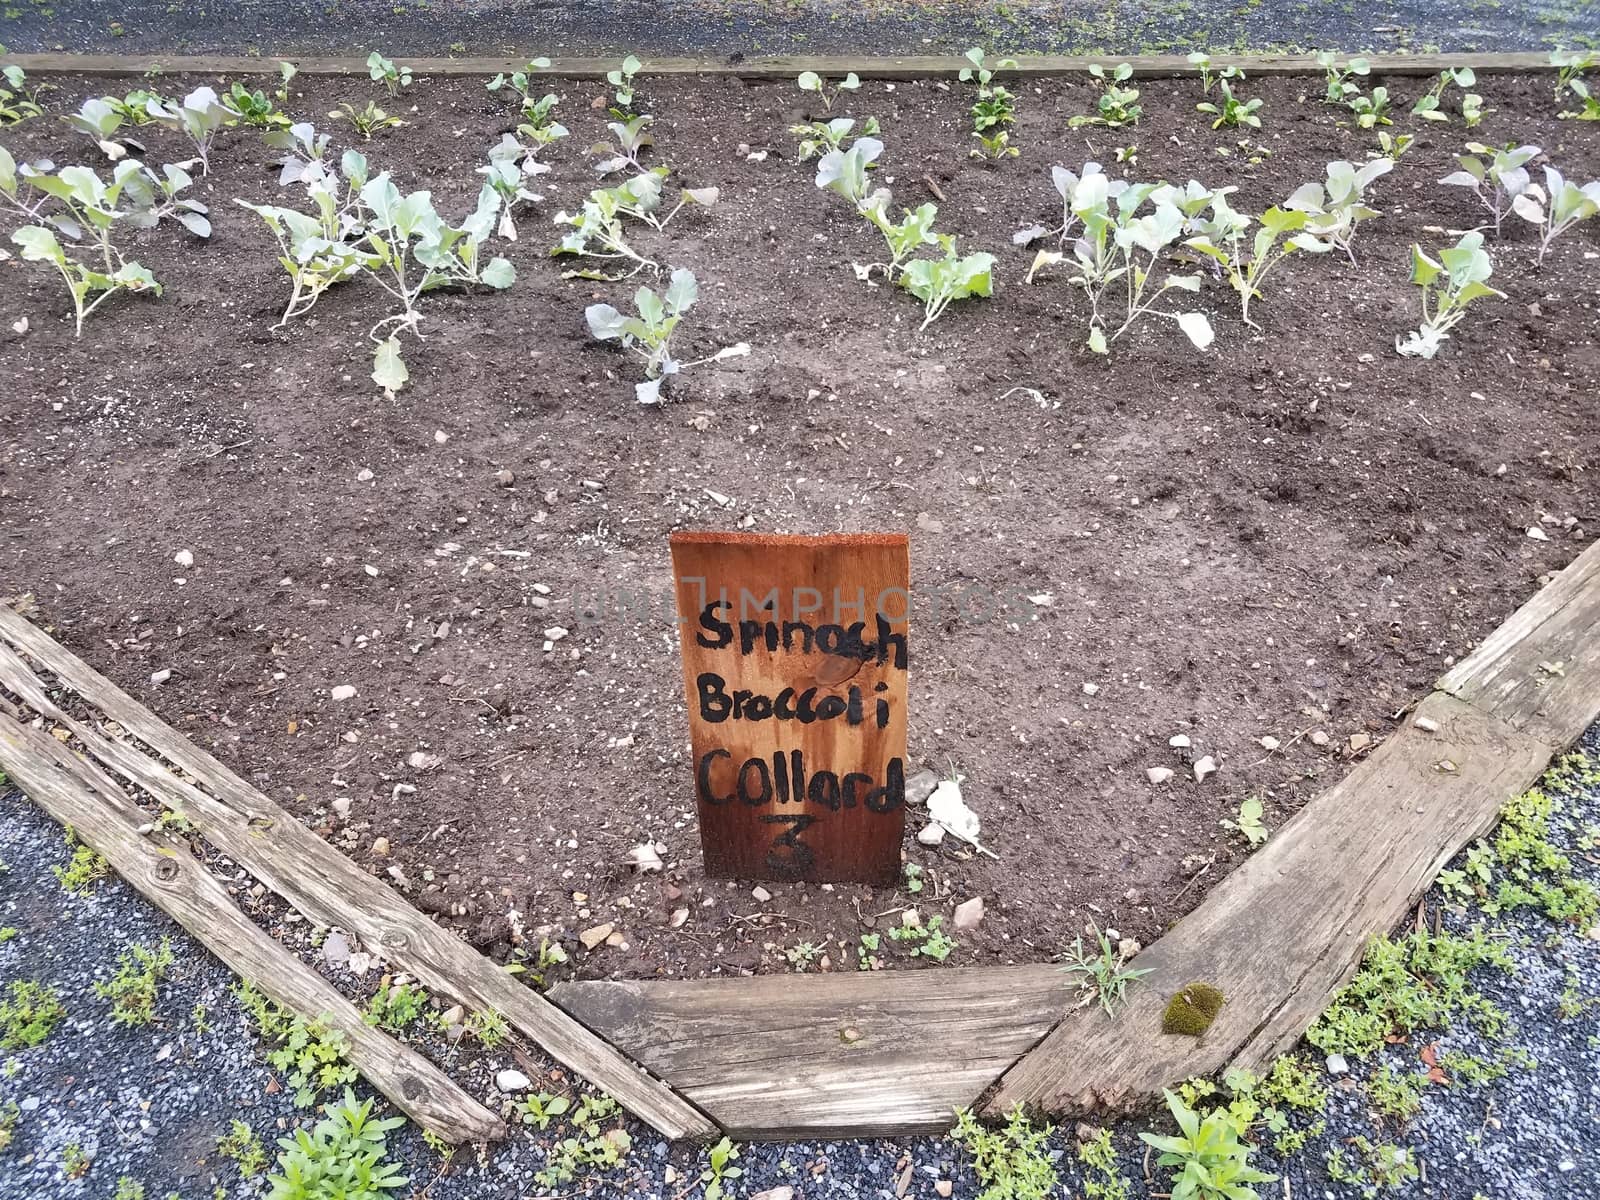 garden with spinach, broccoli, and collard greens and wood sign